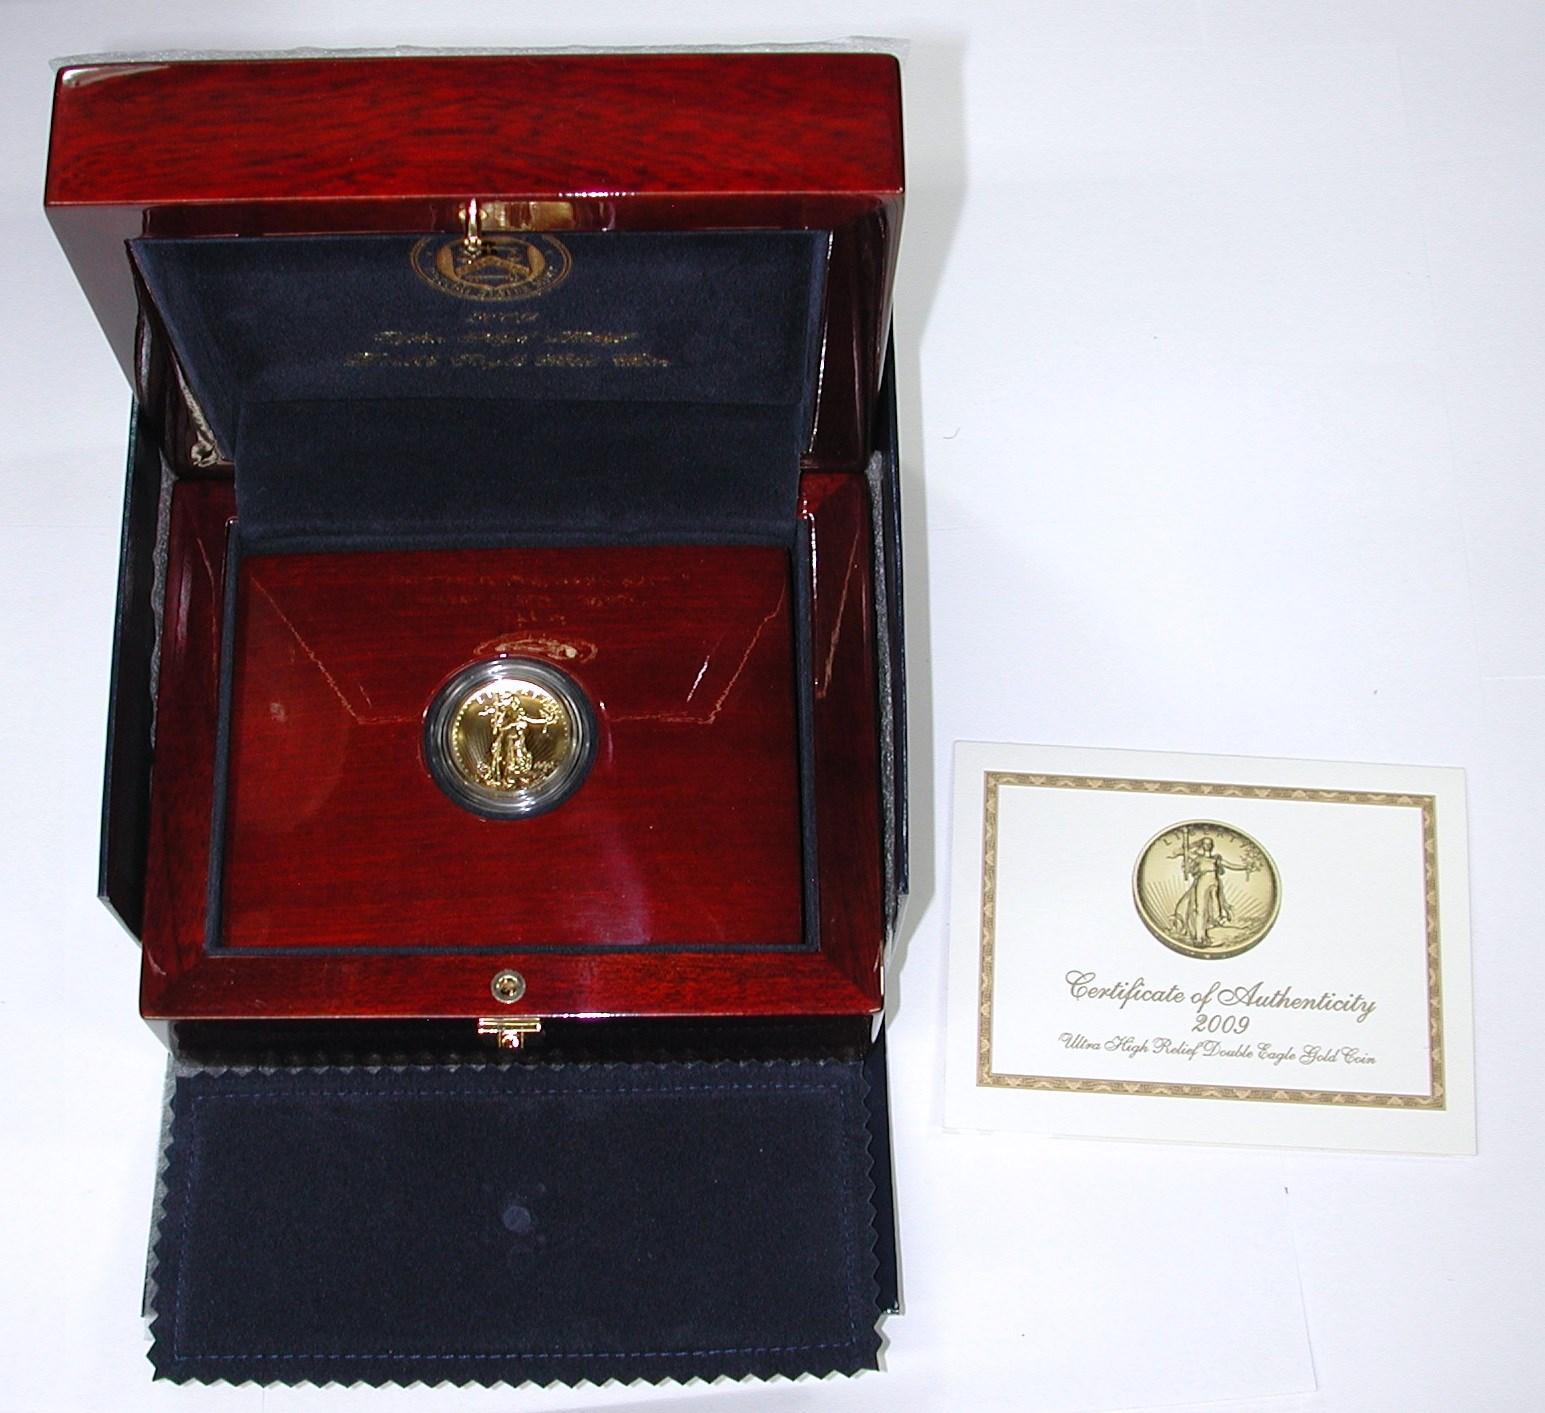 2009 ULTRA HIGH RELIEF DOUBLE EAGLE GOLD COIN in BOX with BOOKLET